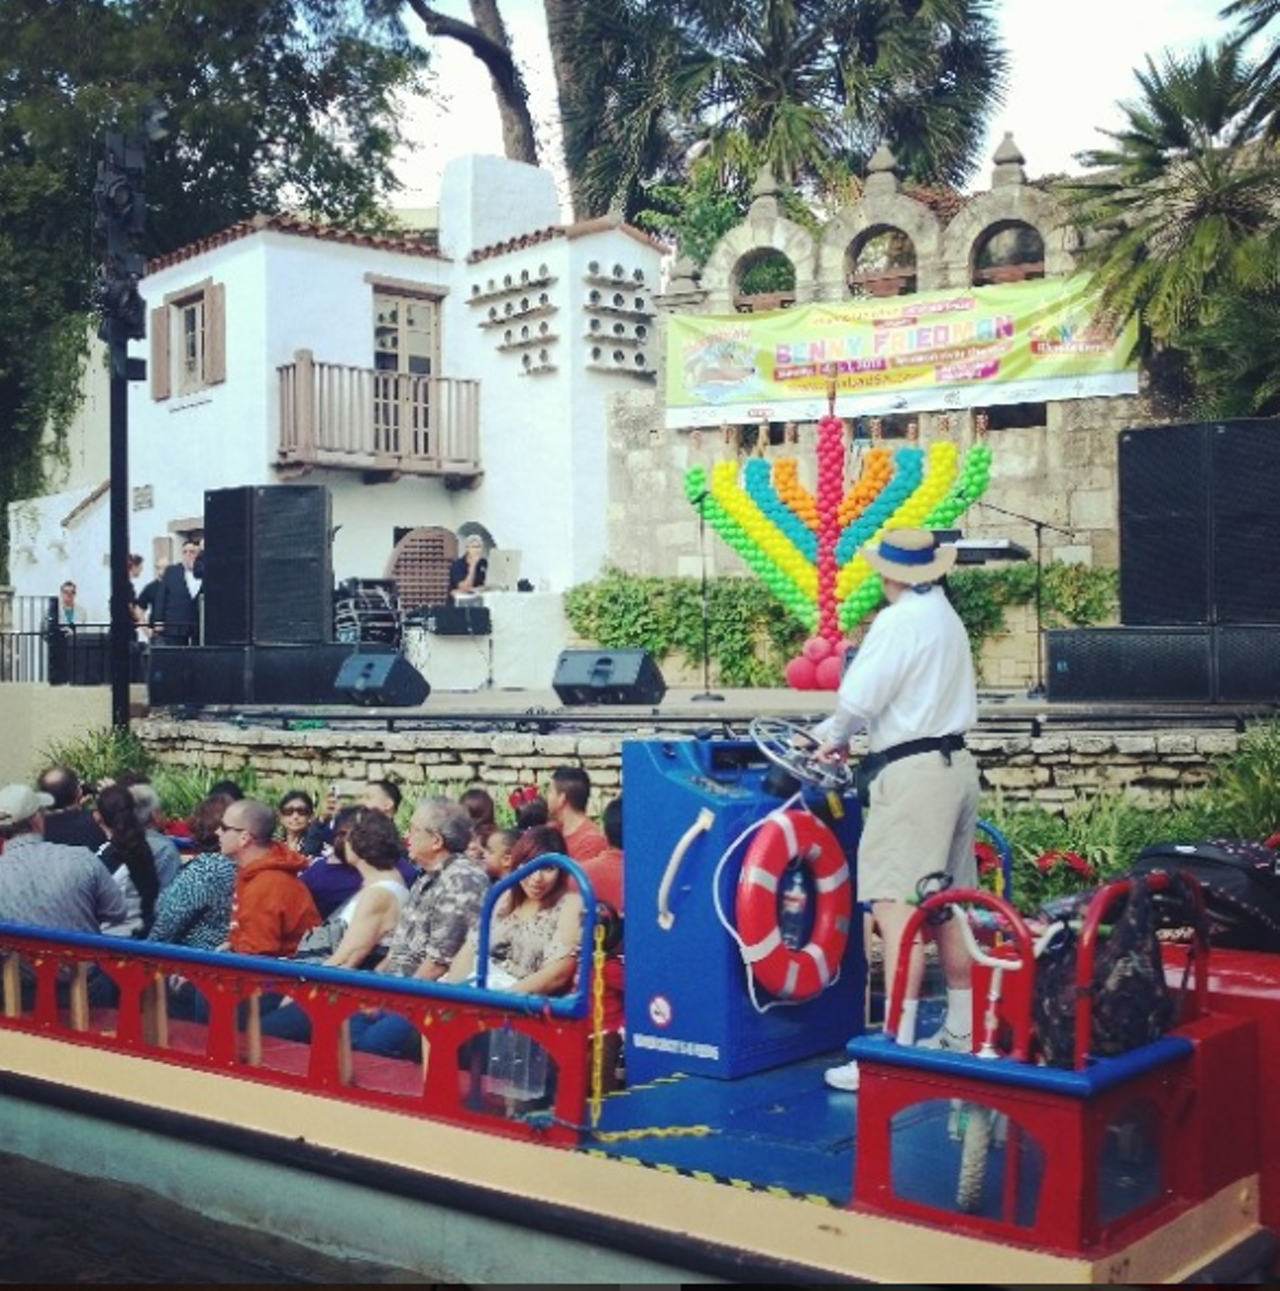 Celebrate Chanukah on the River
Mark your calendars now: On Dec. 17 at the Arneson River Theater, check out a live performance and the lighting of the Menorah. 
Photo via Instagram, thisizzreal